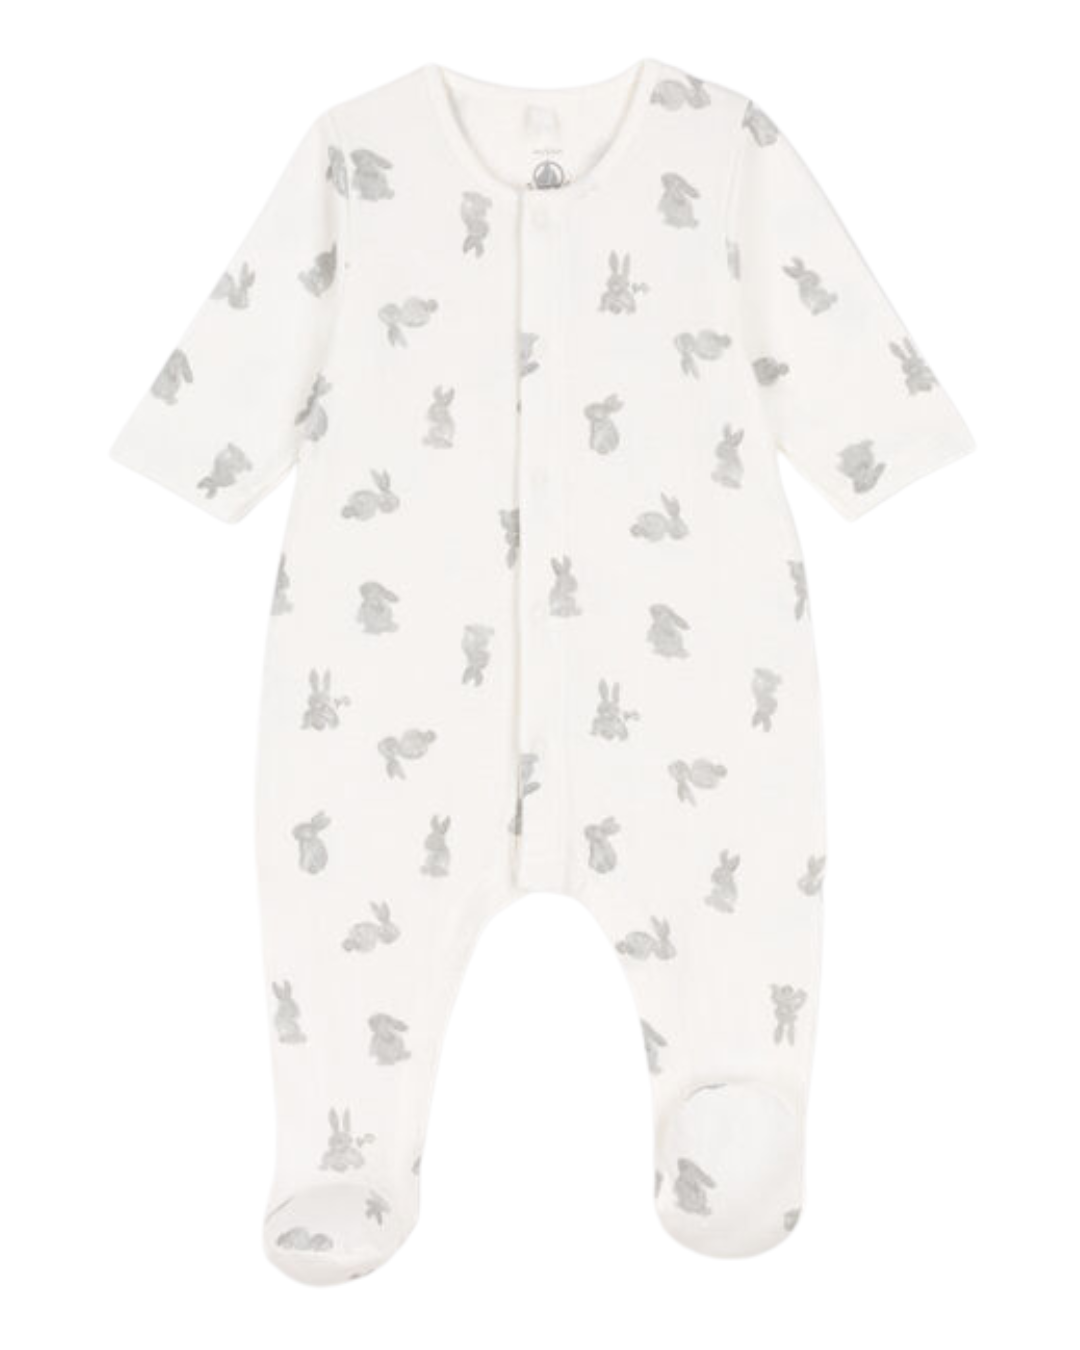 Front Snap Bunny Print Footie White/Grey